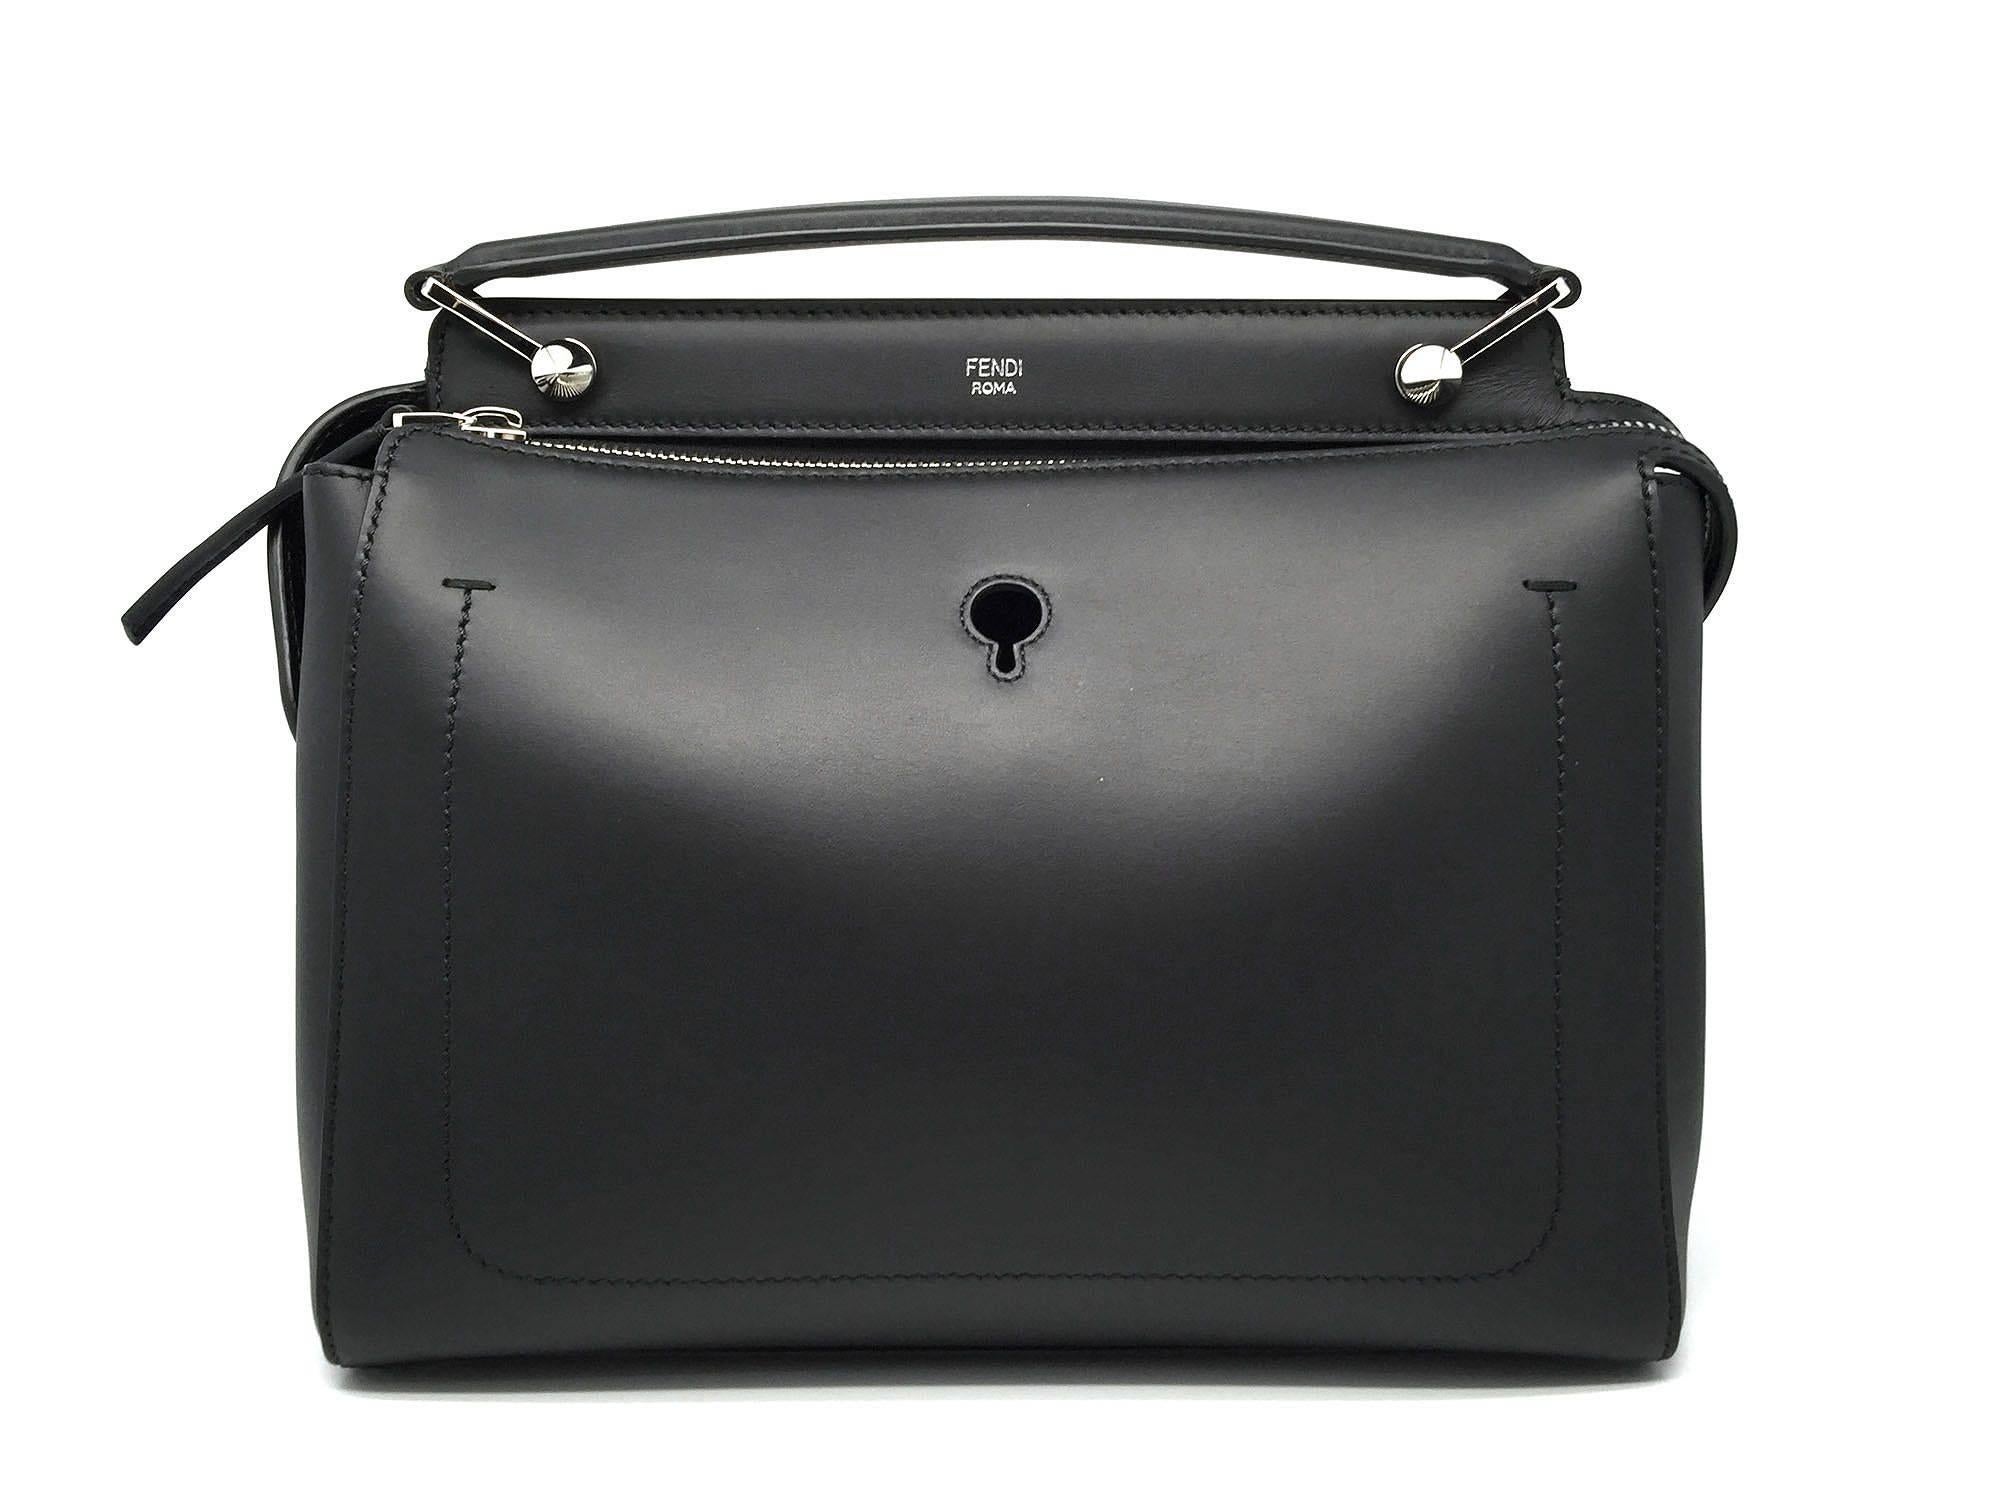 Color: Black 

Material: Calfskin Leather

Condition: Rank S 
Overall: Almost new, not used
Surface: Good
Corners: Good
Edges: Good
Handles/Straps: Good
Hardware: Good

Dimension: W30 × H26 × D15cm（W11.8" × H10.2" ×